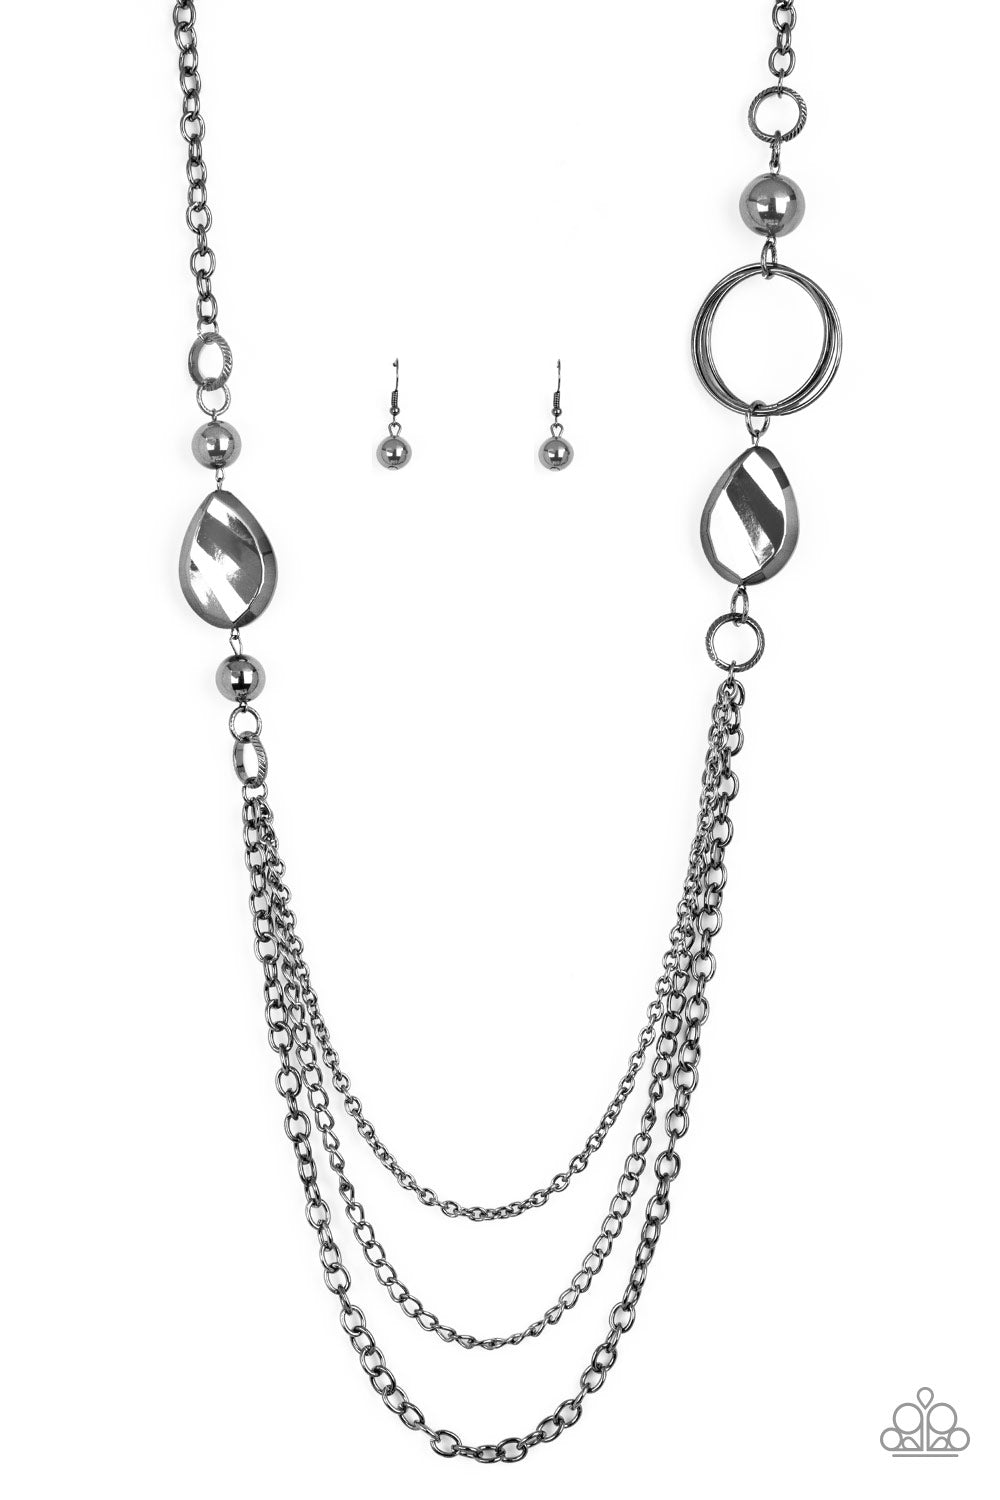 Paparazzi Accessories Rebels Have More Fun - Black Necklace & Earrings